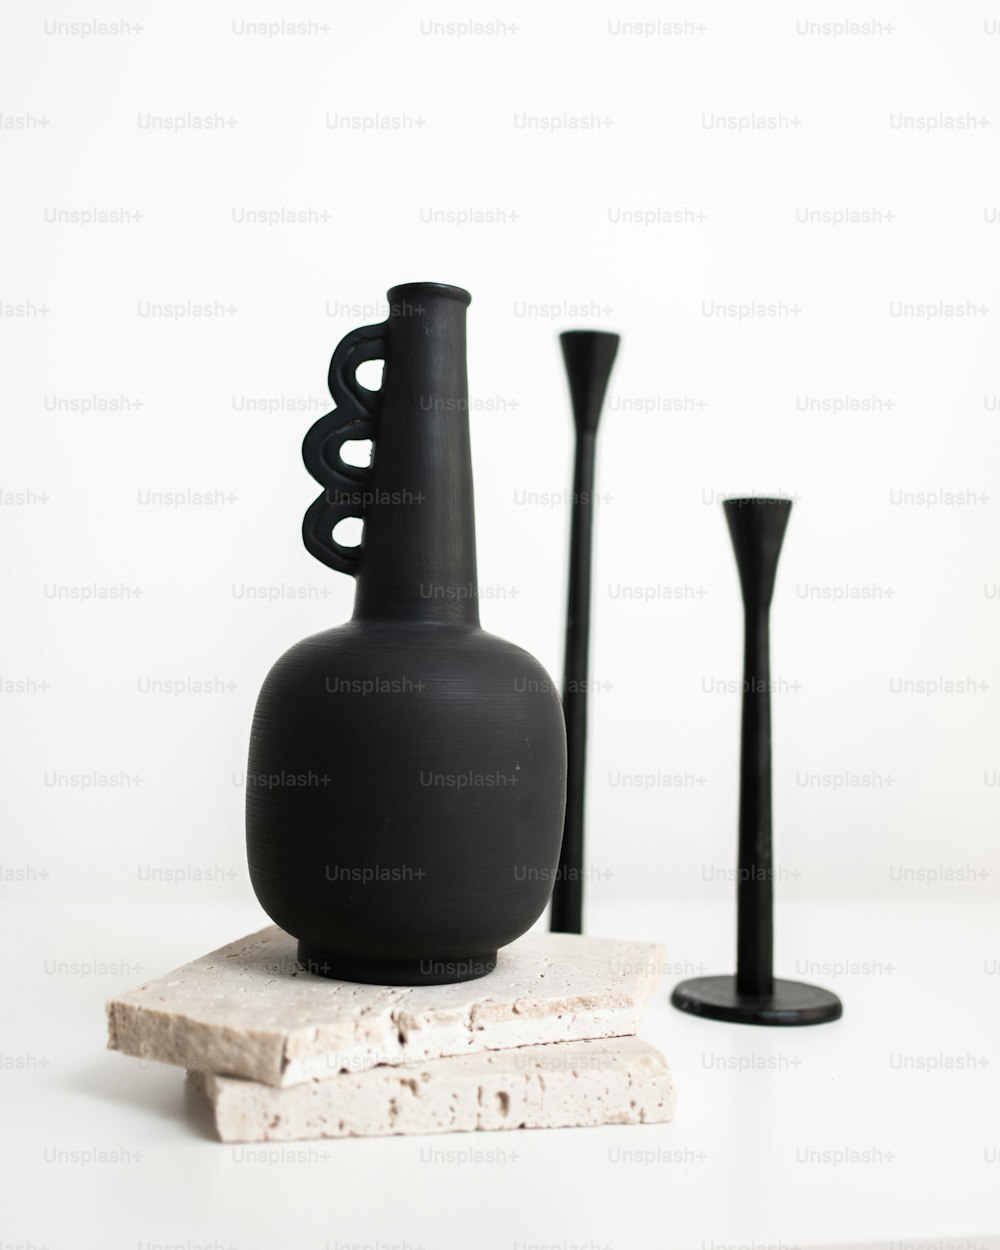 a black vase sitting on top of a white table